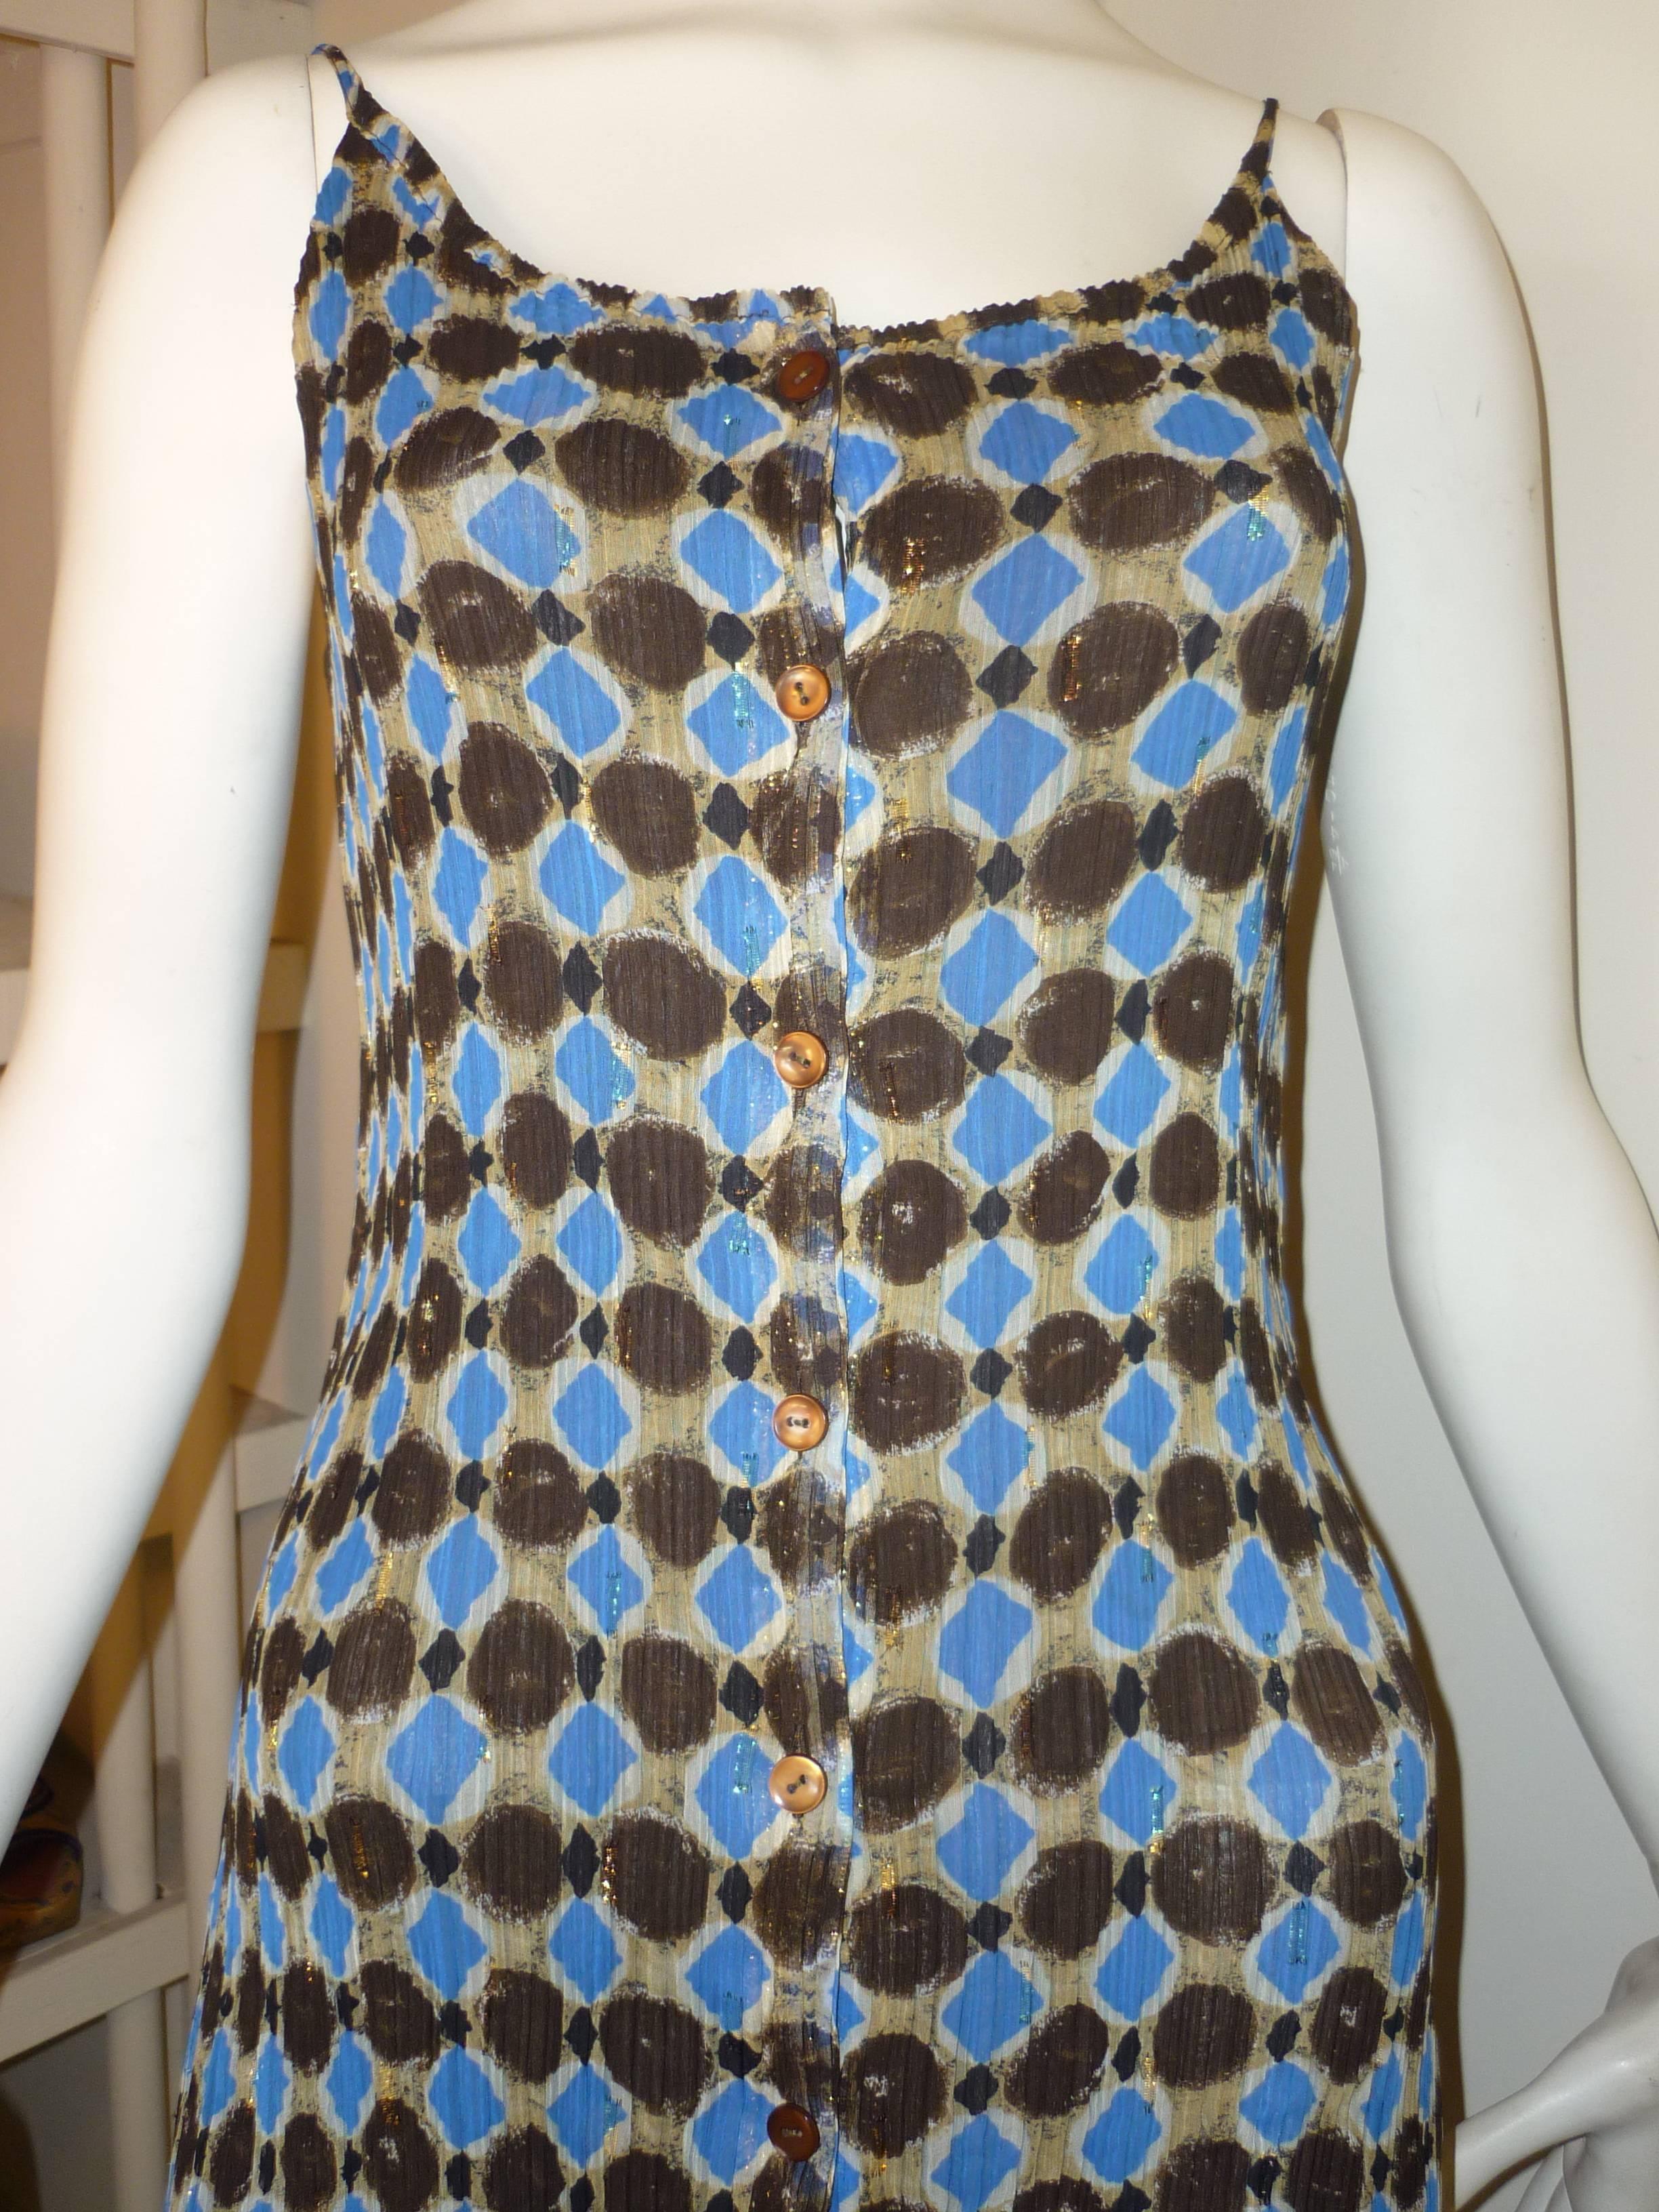 Perfect for the summer, this dress has an interesting diamond and circle print with a gold lurex thread running throughout.

It is not a Pleats Please dress but has a similar feel.

The dress has buttons from top to bottom, and a solid brown